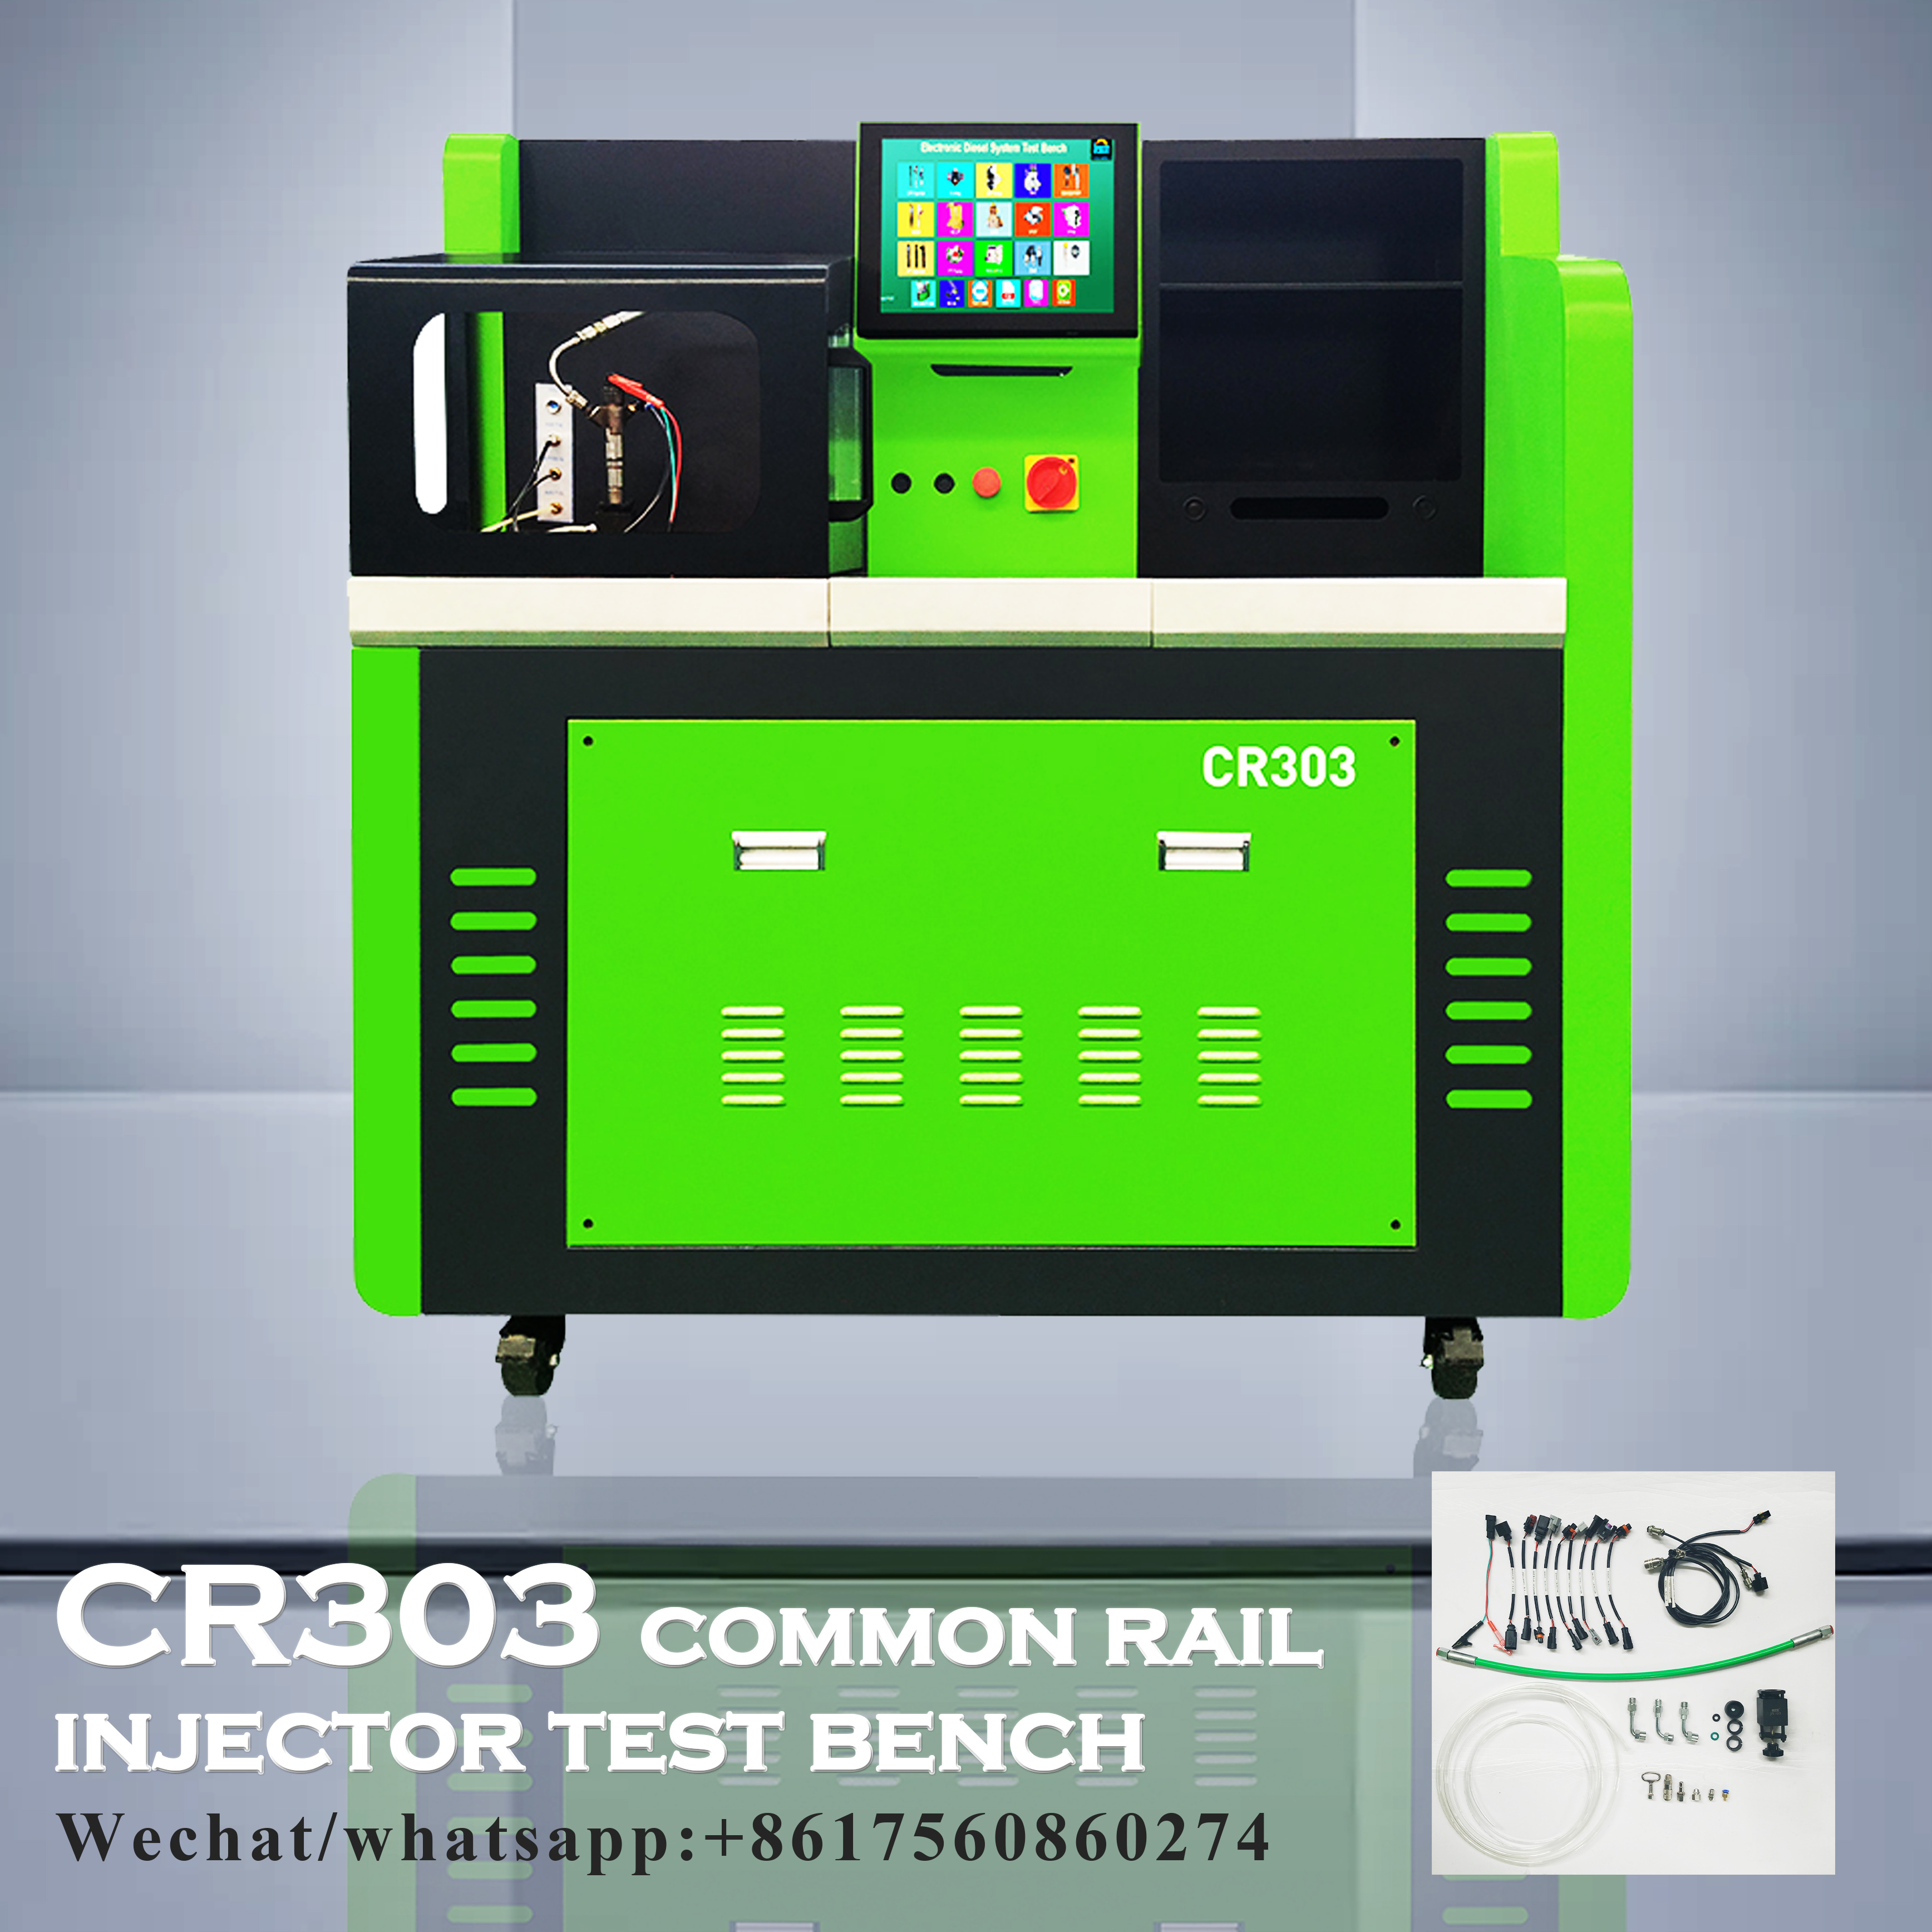 BEACON DIESEL Common Rail Injector Test Bench CR303 Common Rail Injector Testing Machine For CR Piezo Injector